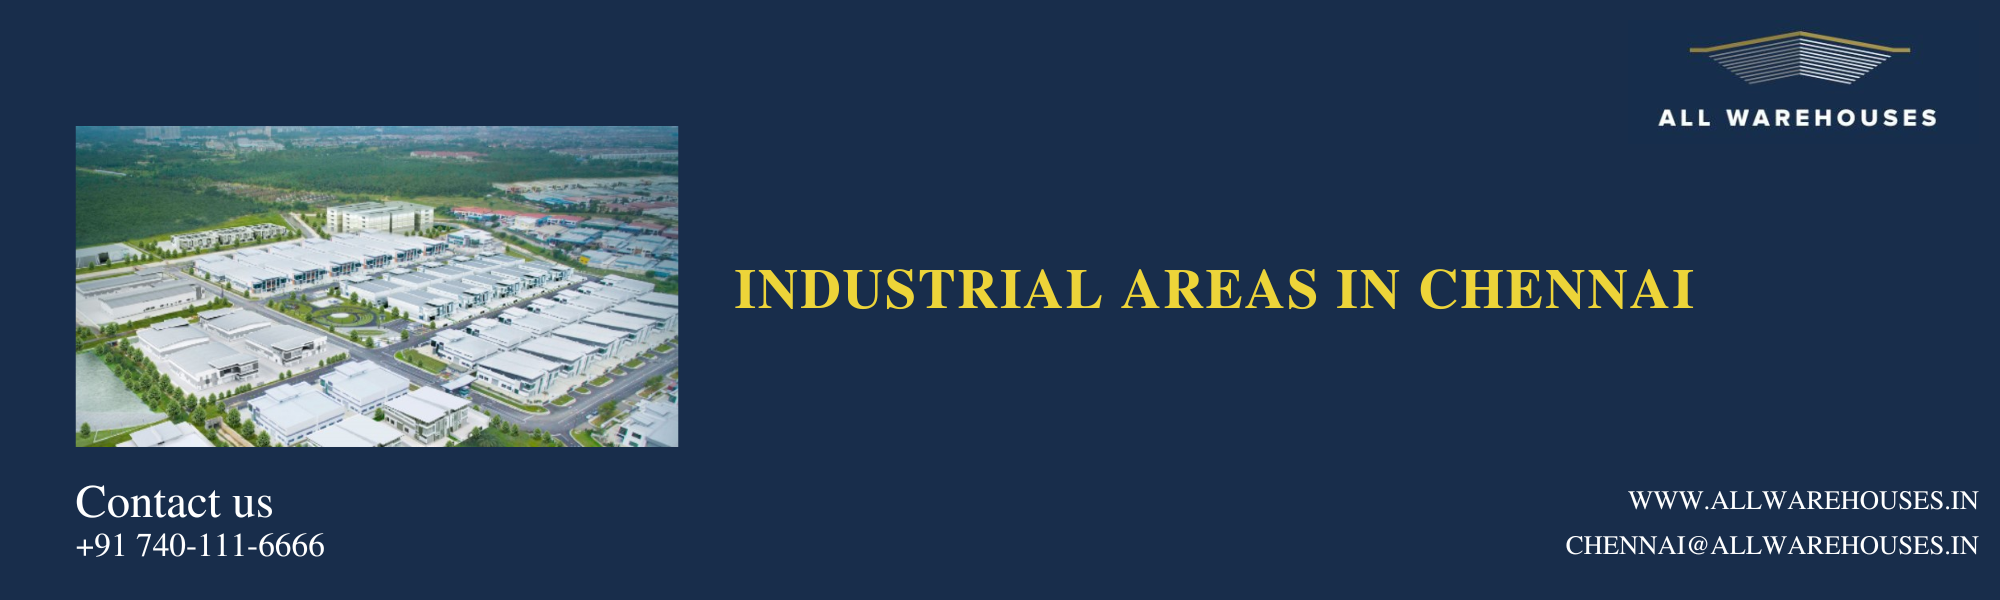 Industrial Areas In Chennai